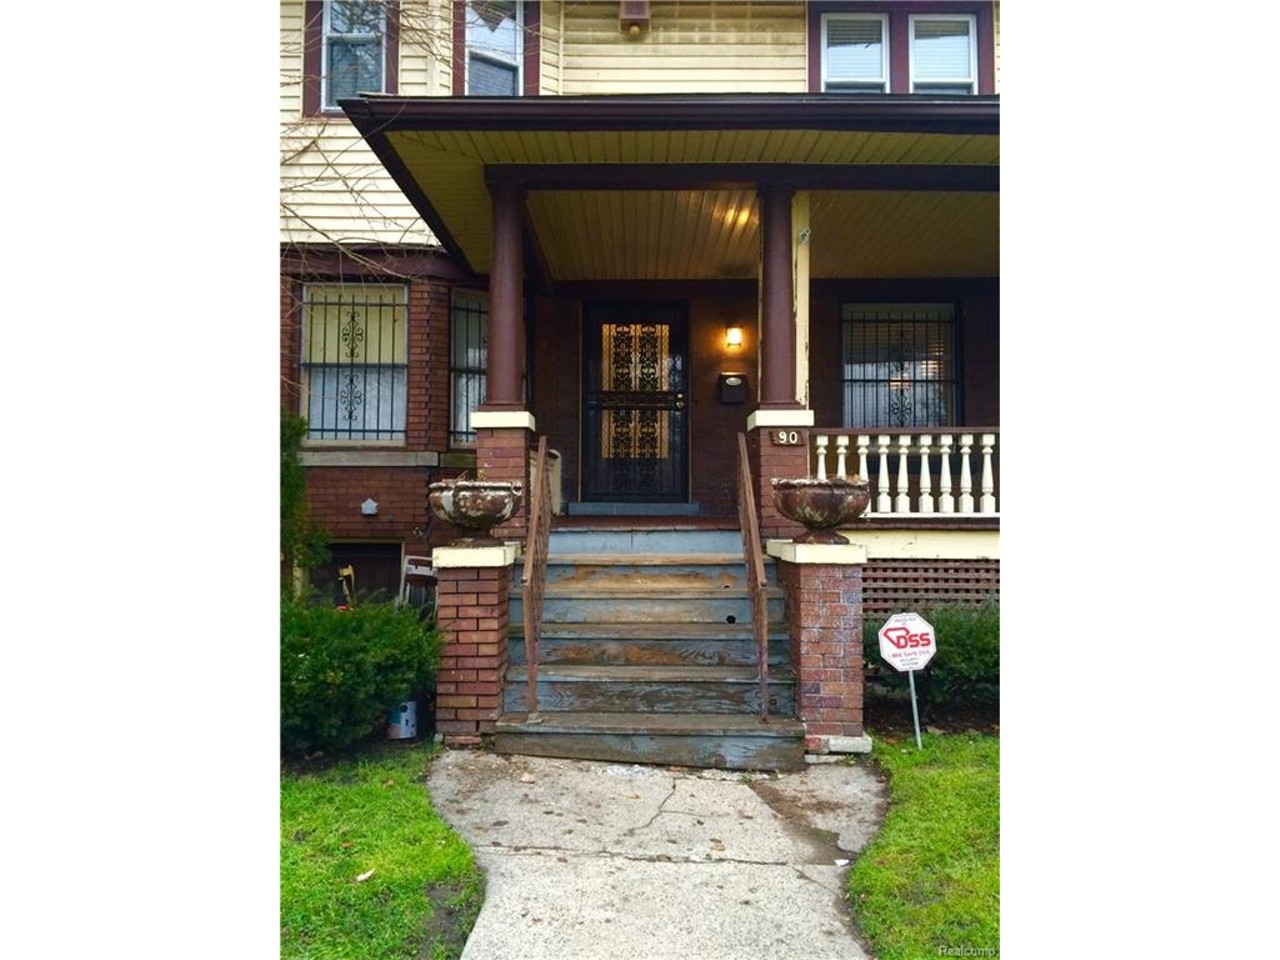 90 Glynn Court, Detroit
$199,900; 2 beds, 2.1 baths
This place is only a block away from Woodward and the soon to be opened Q Line. You can actually be one of the few Detroit residents that is close to the line.